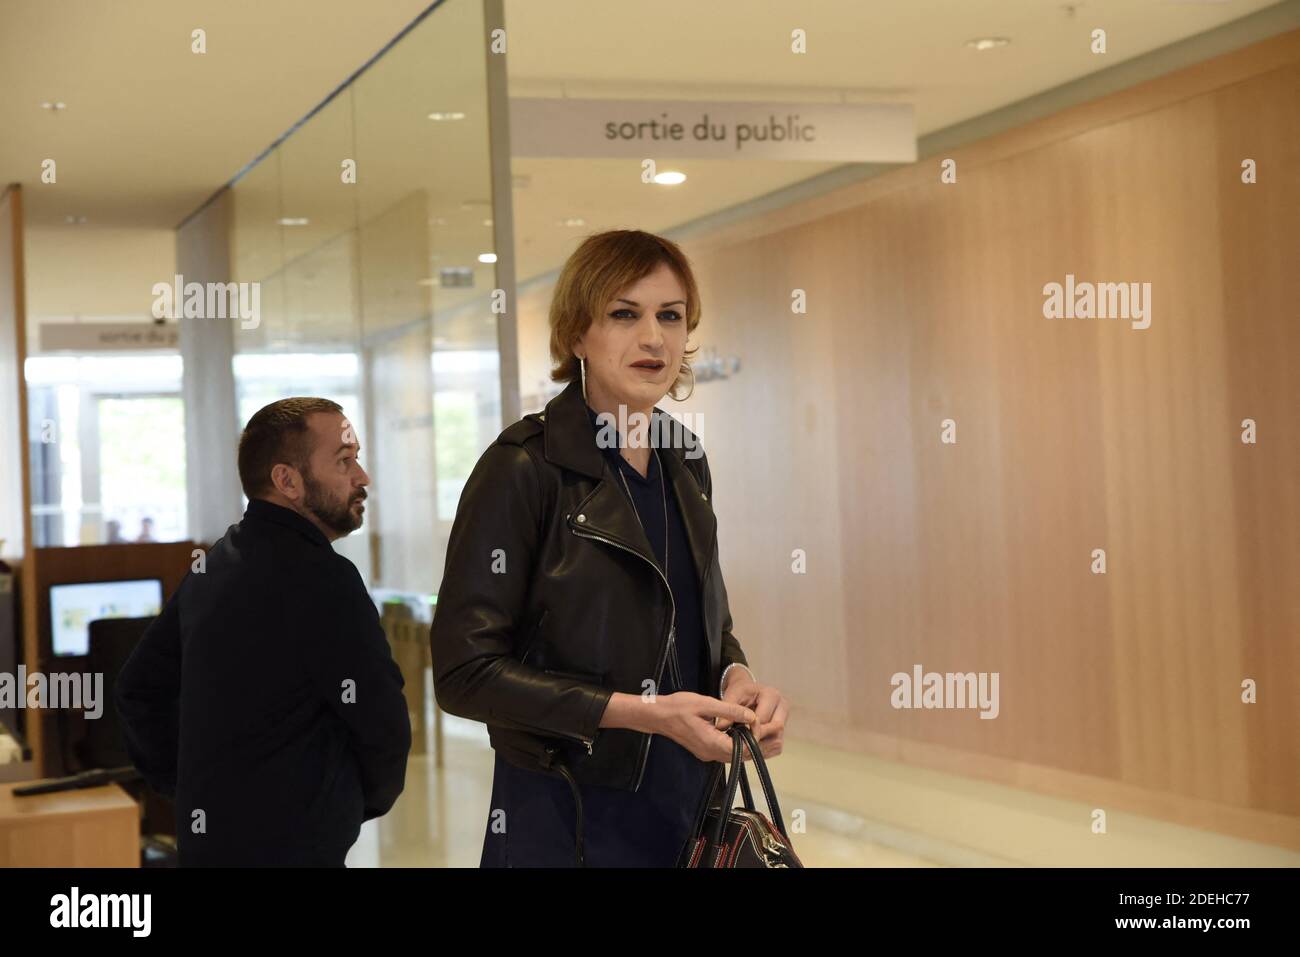 Julia Boyer arriving at the court in Paris, France, on May 22, 2019. Julia Boyer, a transgender woman assaulted in Paris, on April 4, 2019. French authorities are investigating an attack on a transgender woman who was assaulted and jeered at a demonstration at the Place de la Republique in central Paris, against Algerian president that sparked outrage on April 3, 2019, among activists and politicians. A video of the incident on Sunday, which has been viewed over 1.5 million times on Twitter, showed a group of protesters rounding on the woman as she came out of the metro onto Place de la Republ Stock Photo